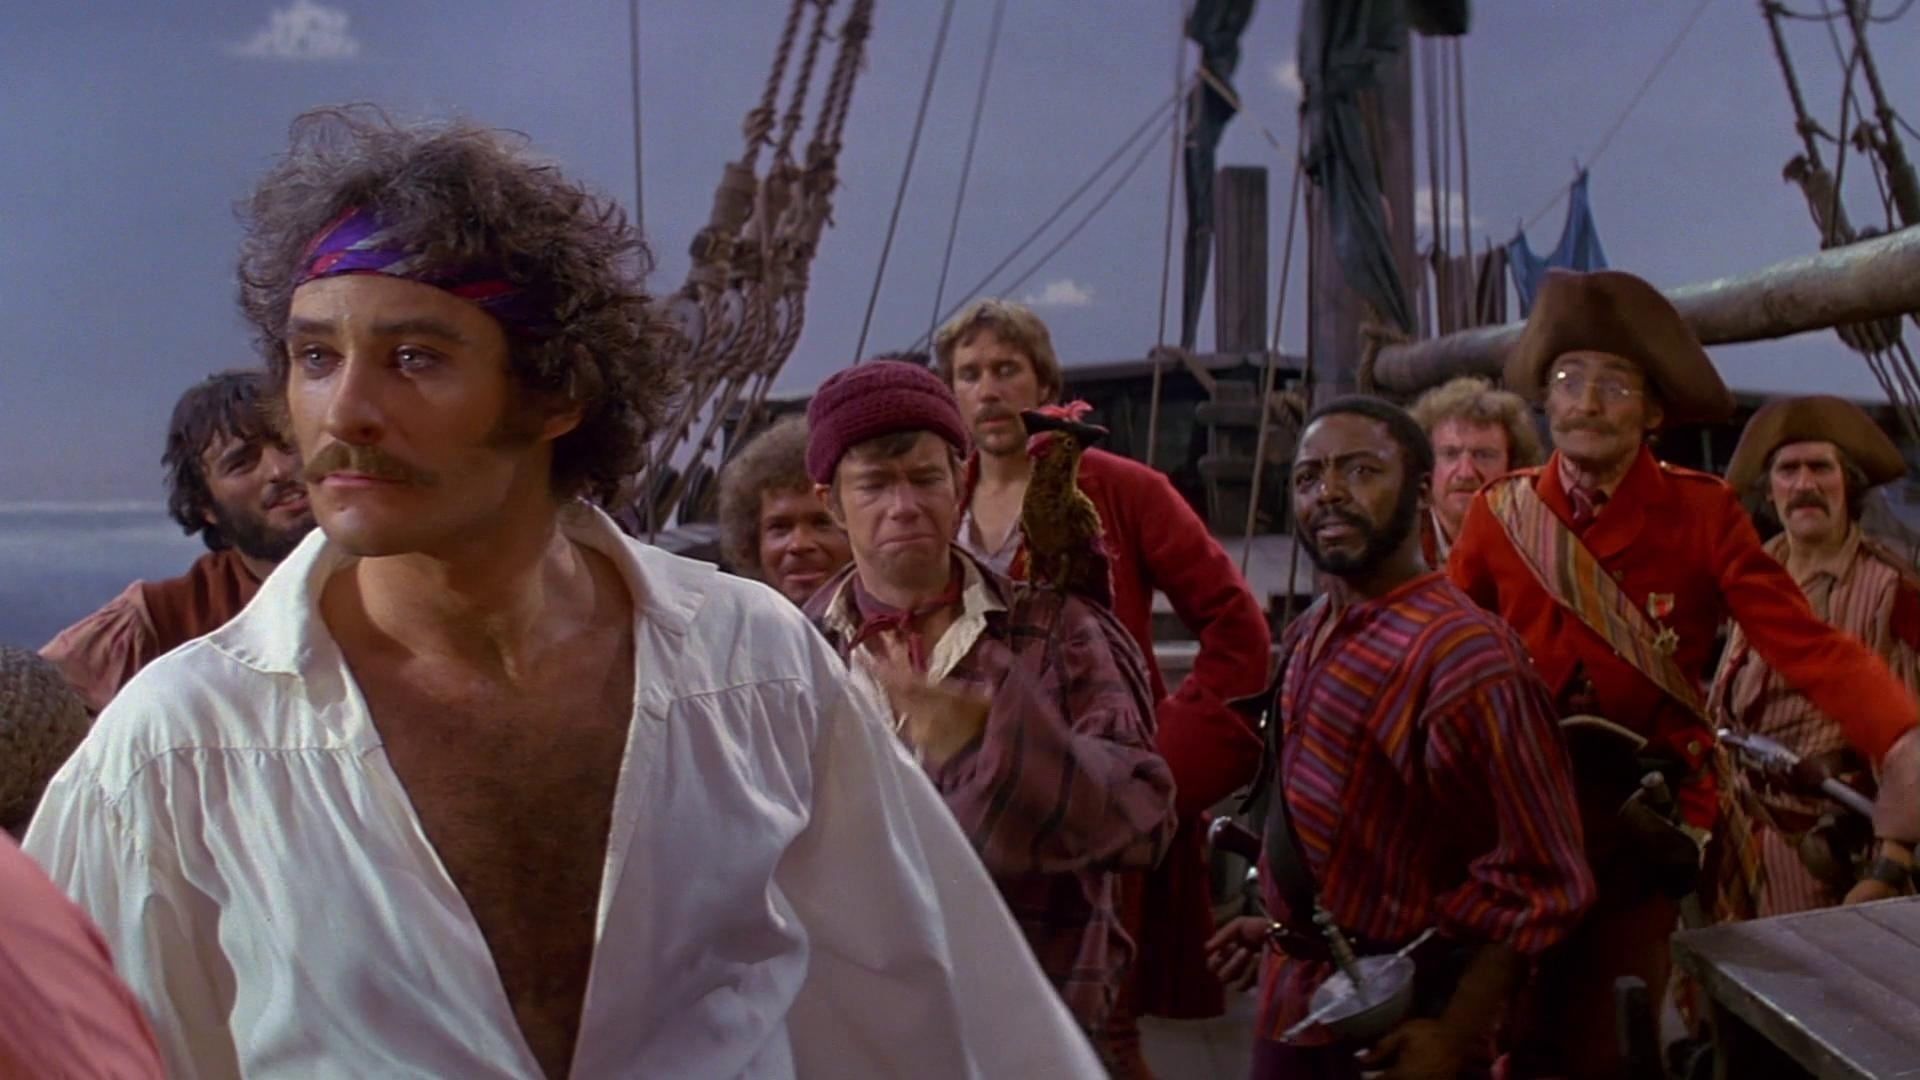 The Pirates of Penzance background